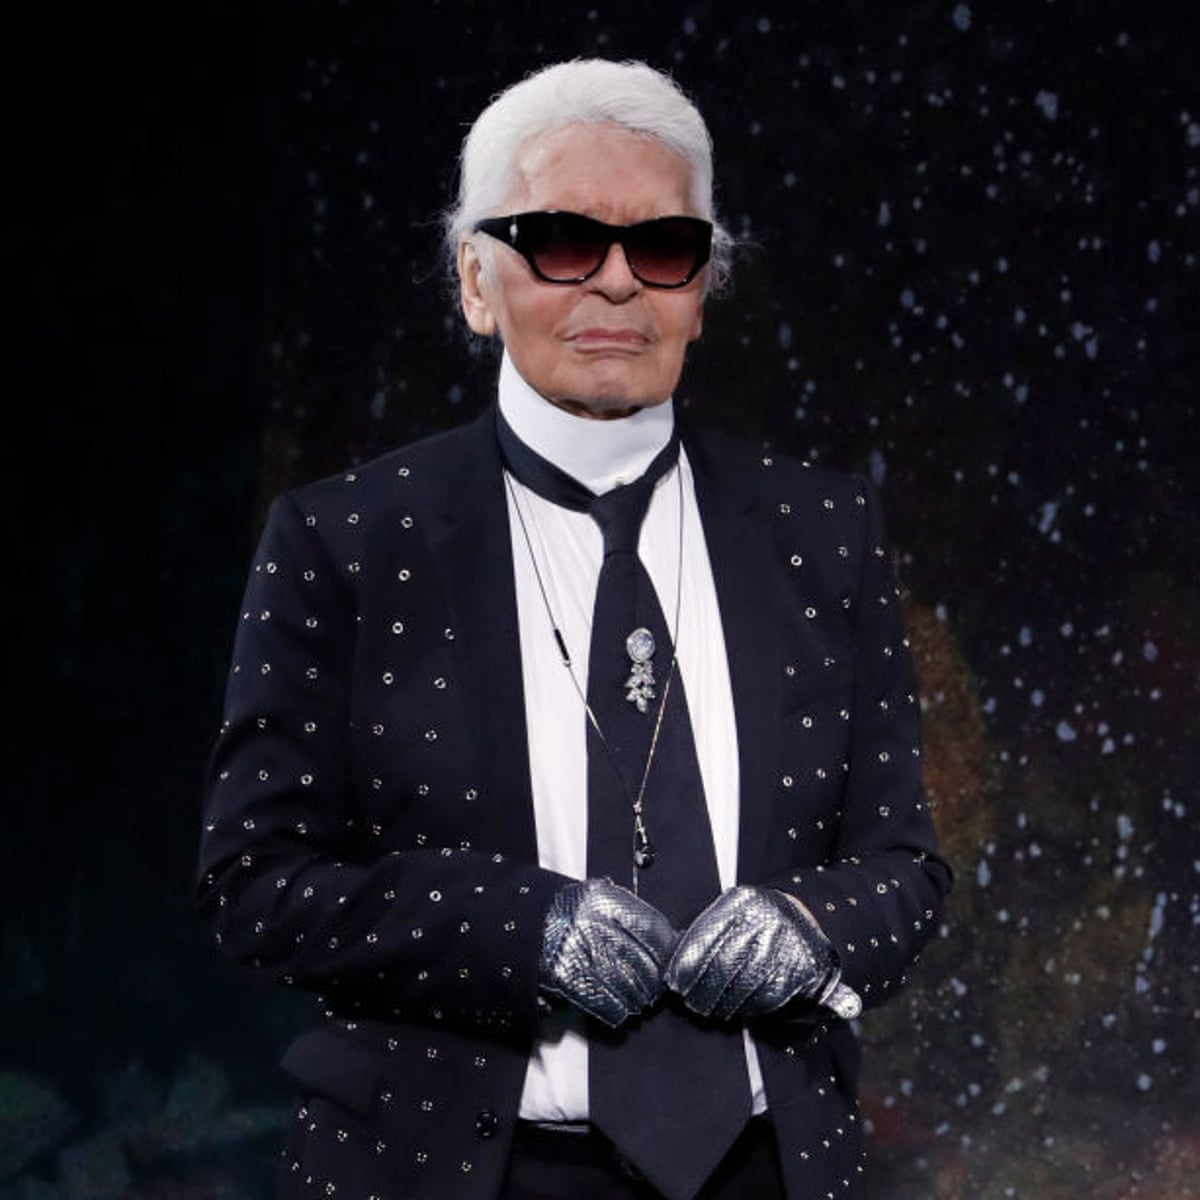 Karl Lagerfeld had odious views. We shouldn't be putting him on a pedestal, Tayo Bero